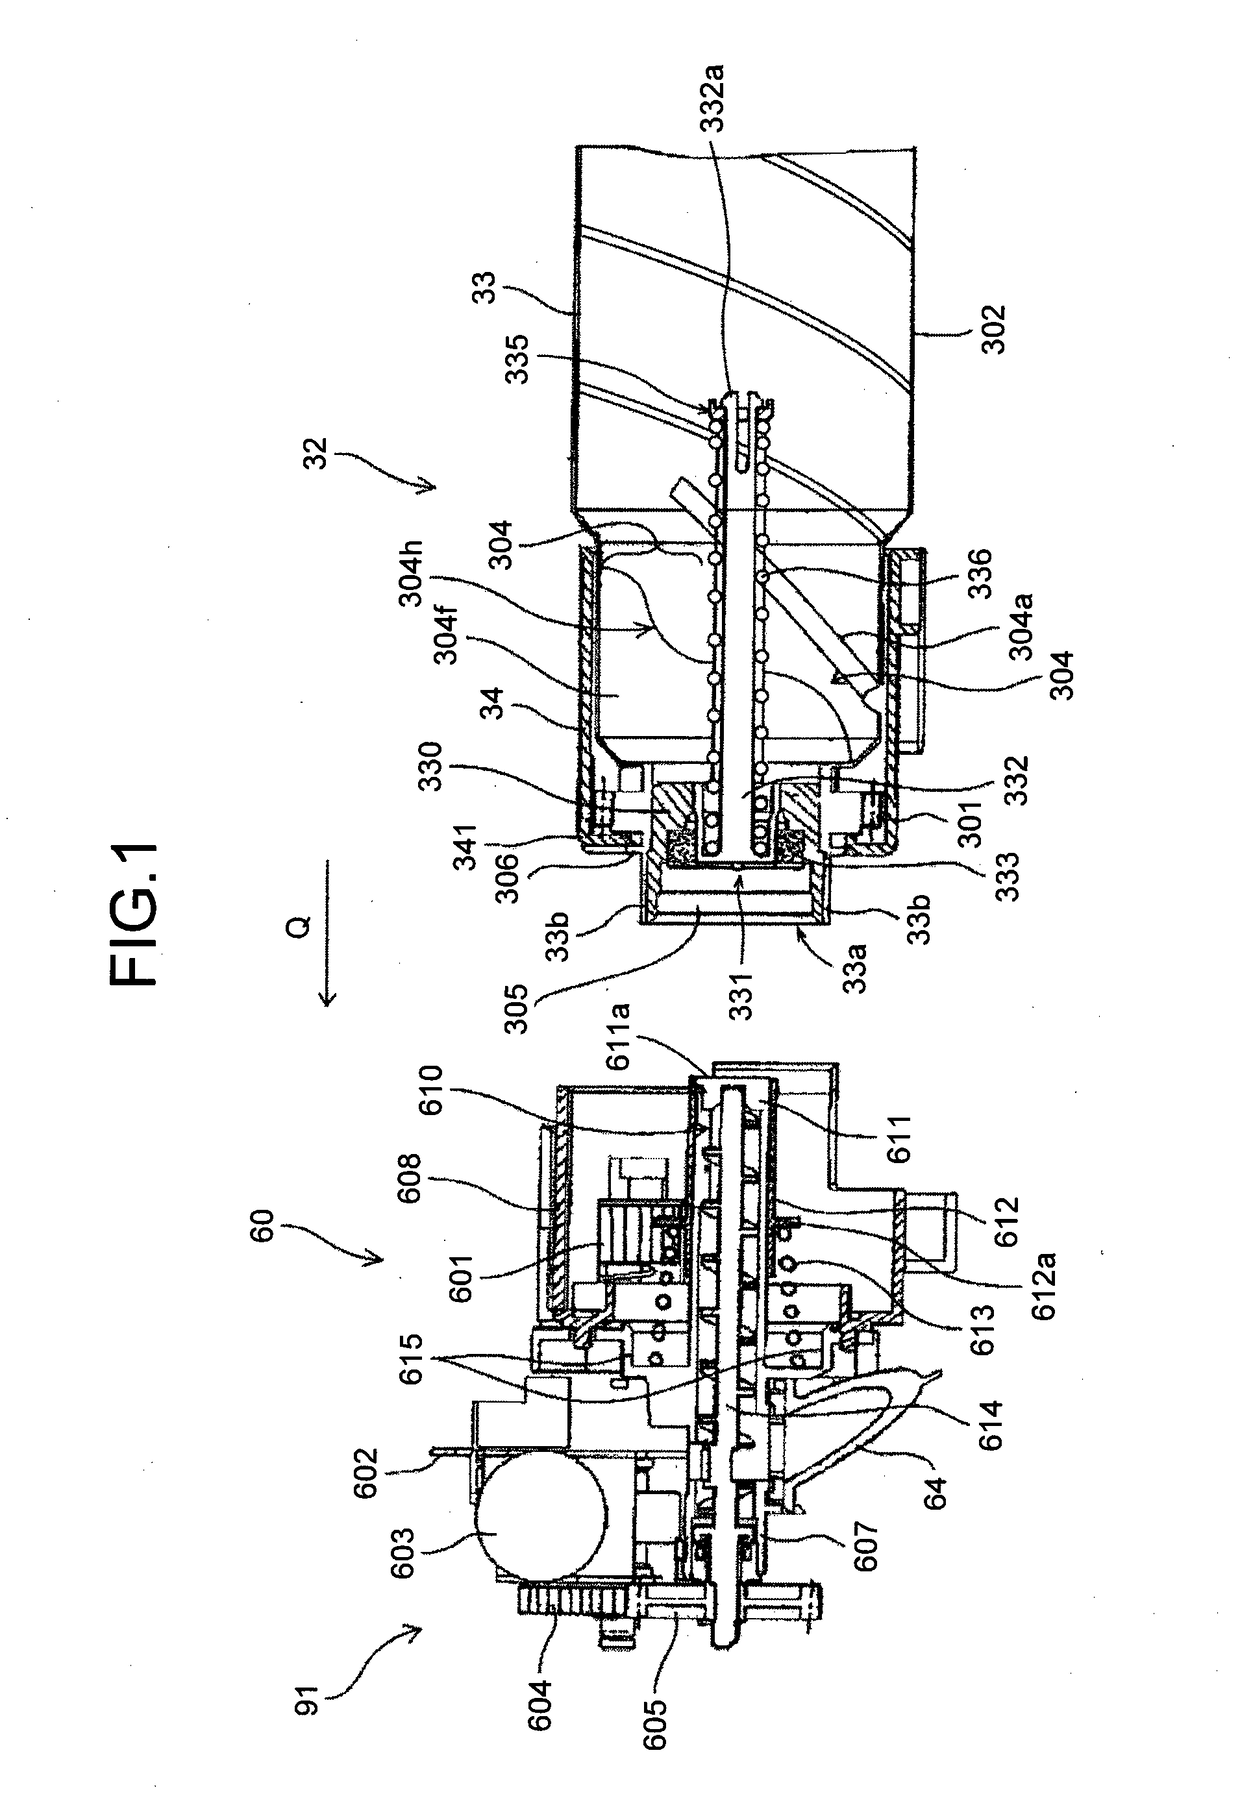 Powder container, image forming apparatus, and nozzle receiver